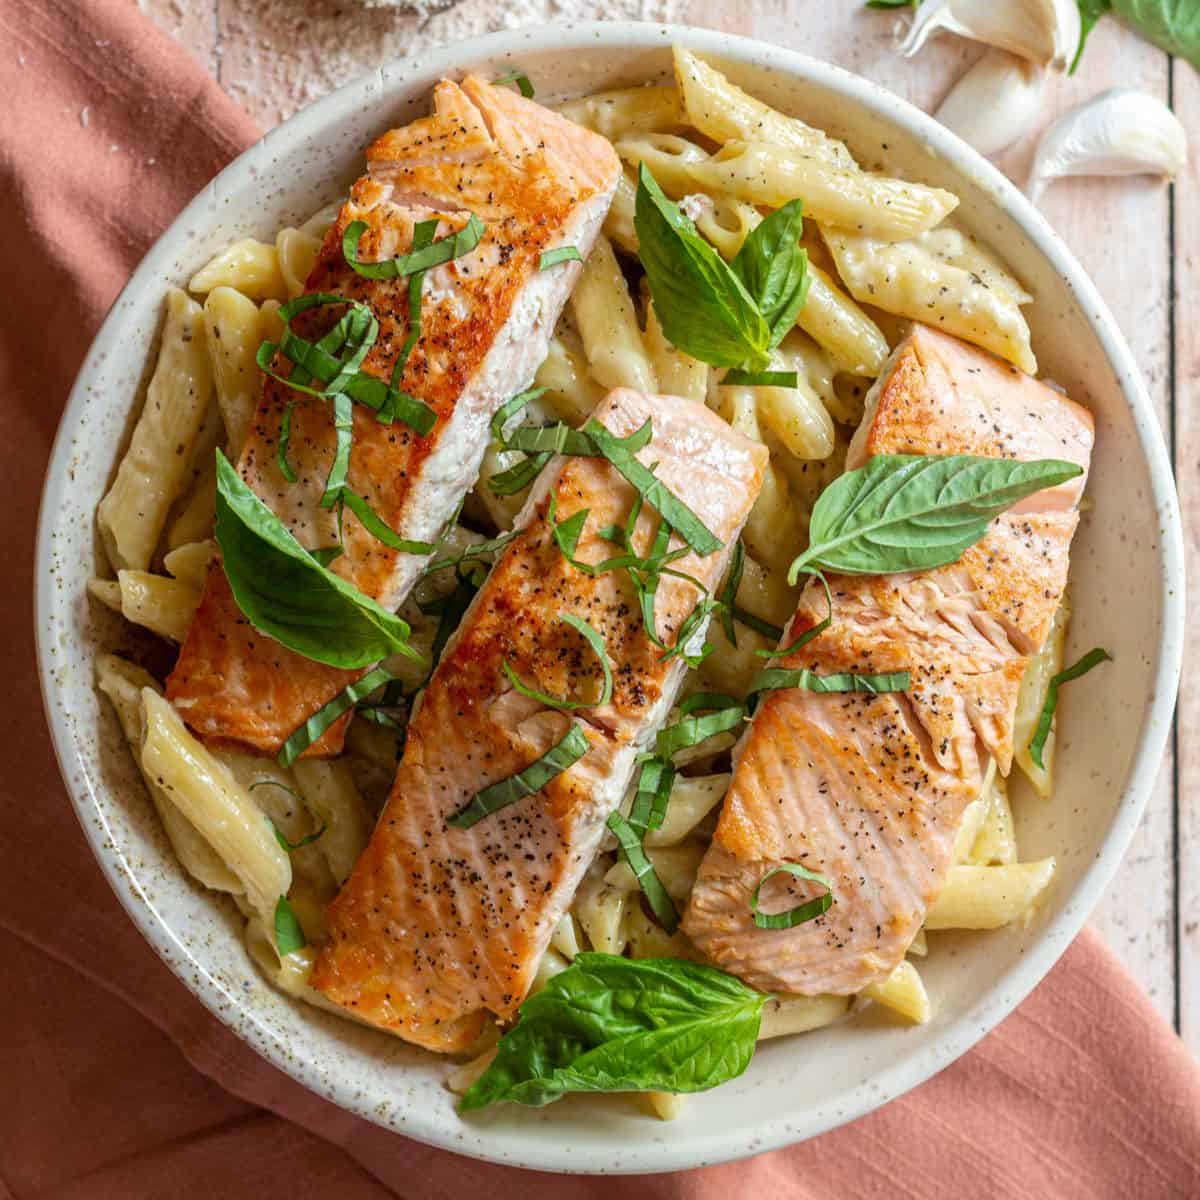 Three seared salmon filets over a bowl of Penne al Salmone pasta, garnished with fresh basil leaves.